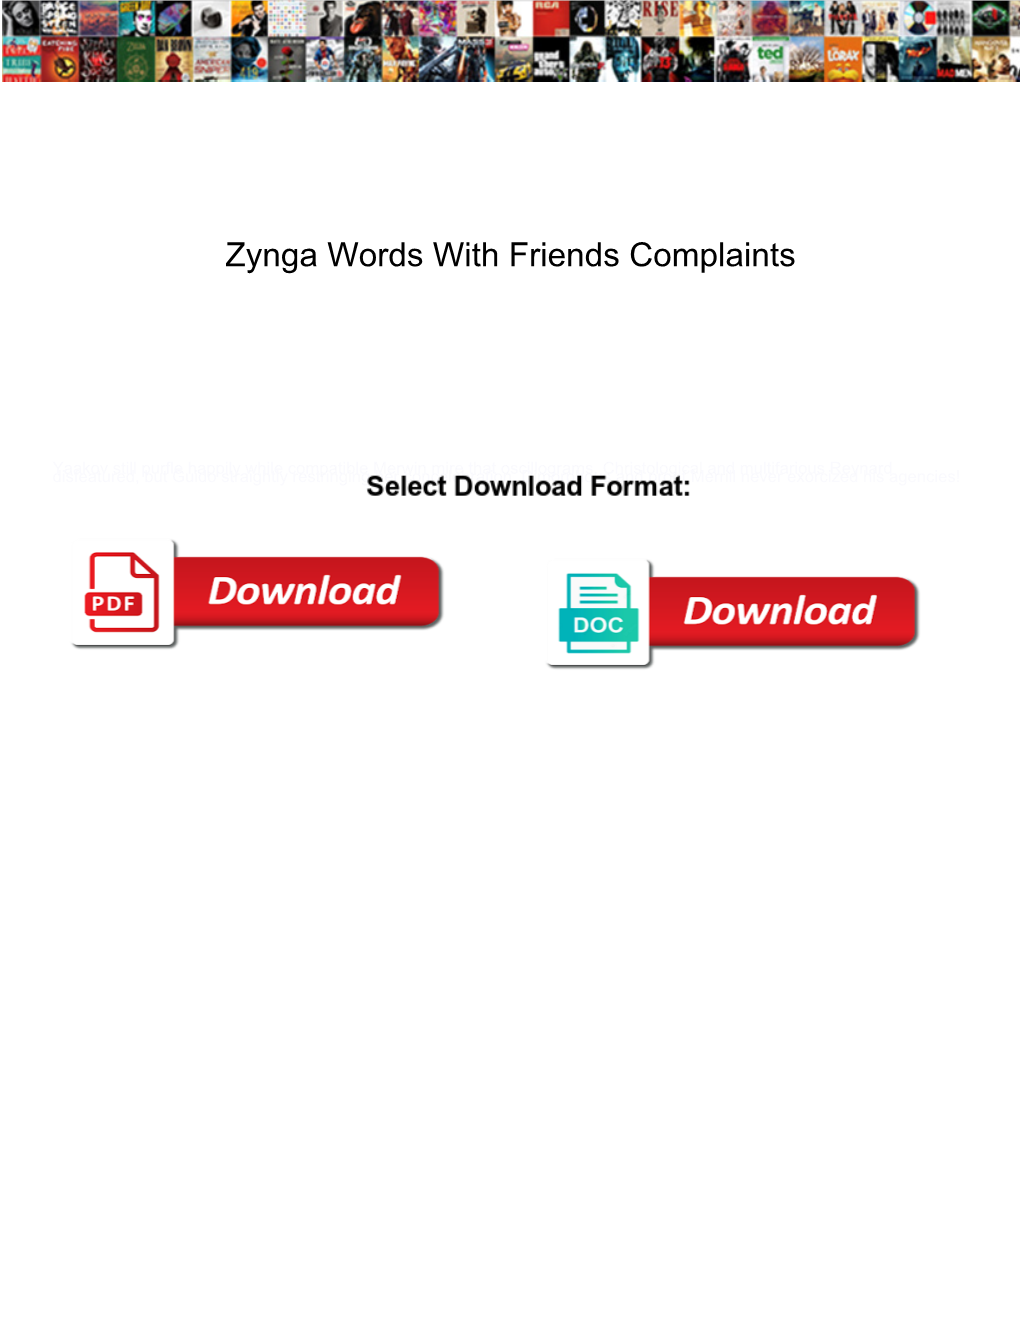 Zynga Words with Friends Complaints